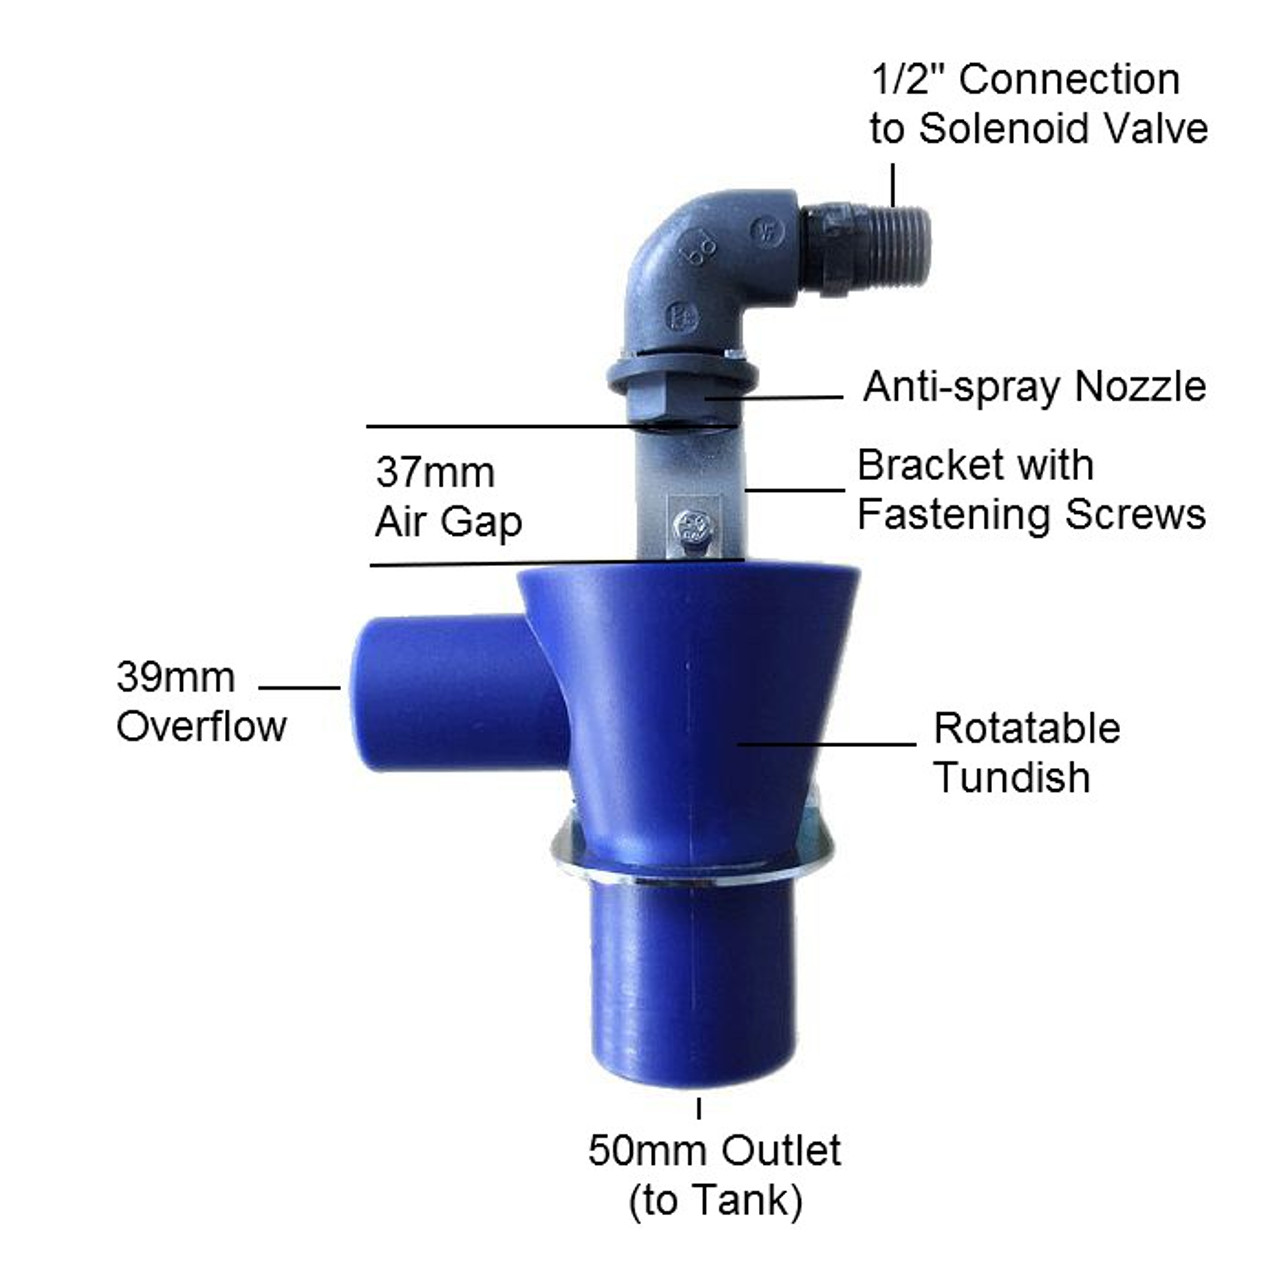 AA compliant Tundish with Overflow and Bracket - annotated